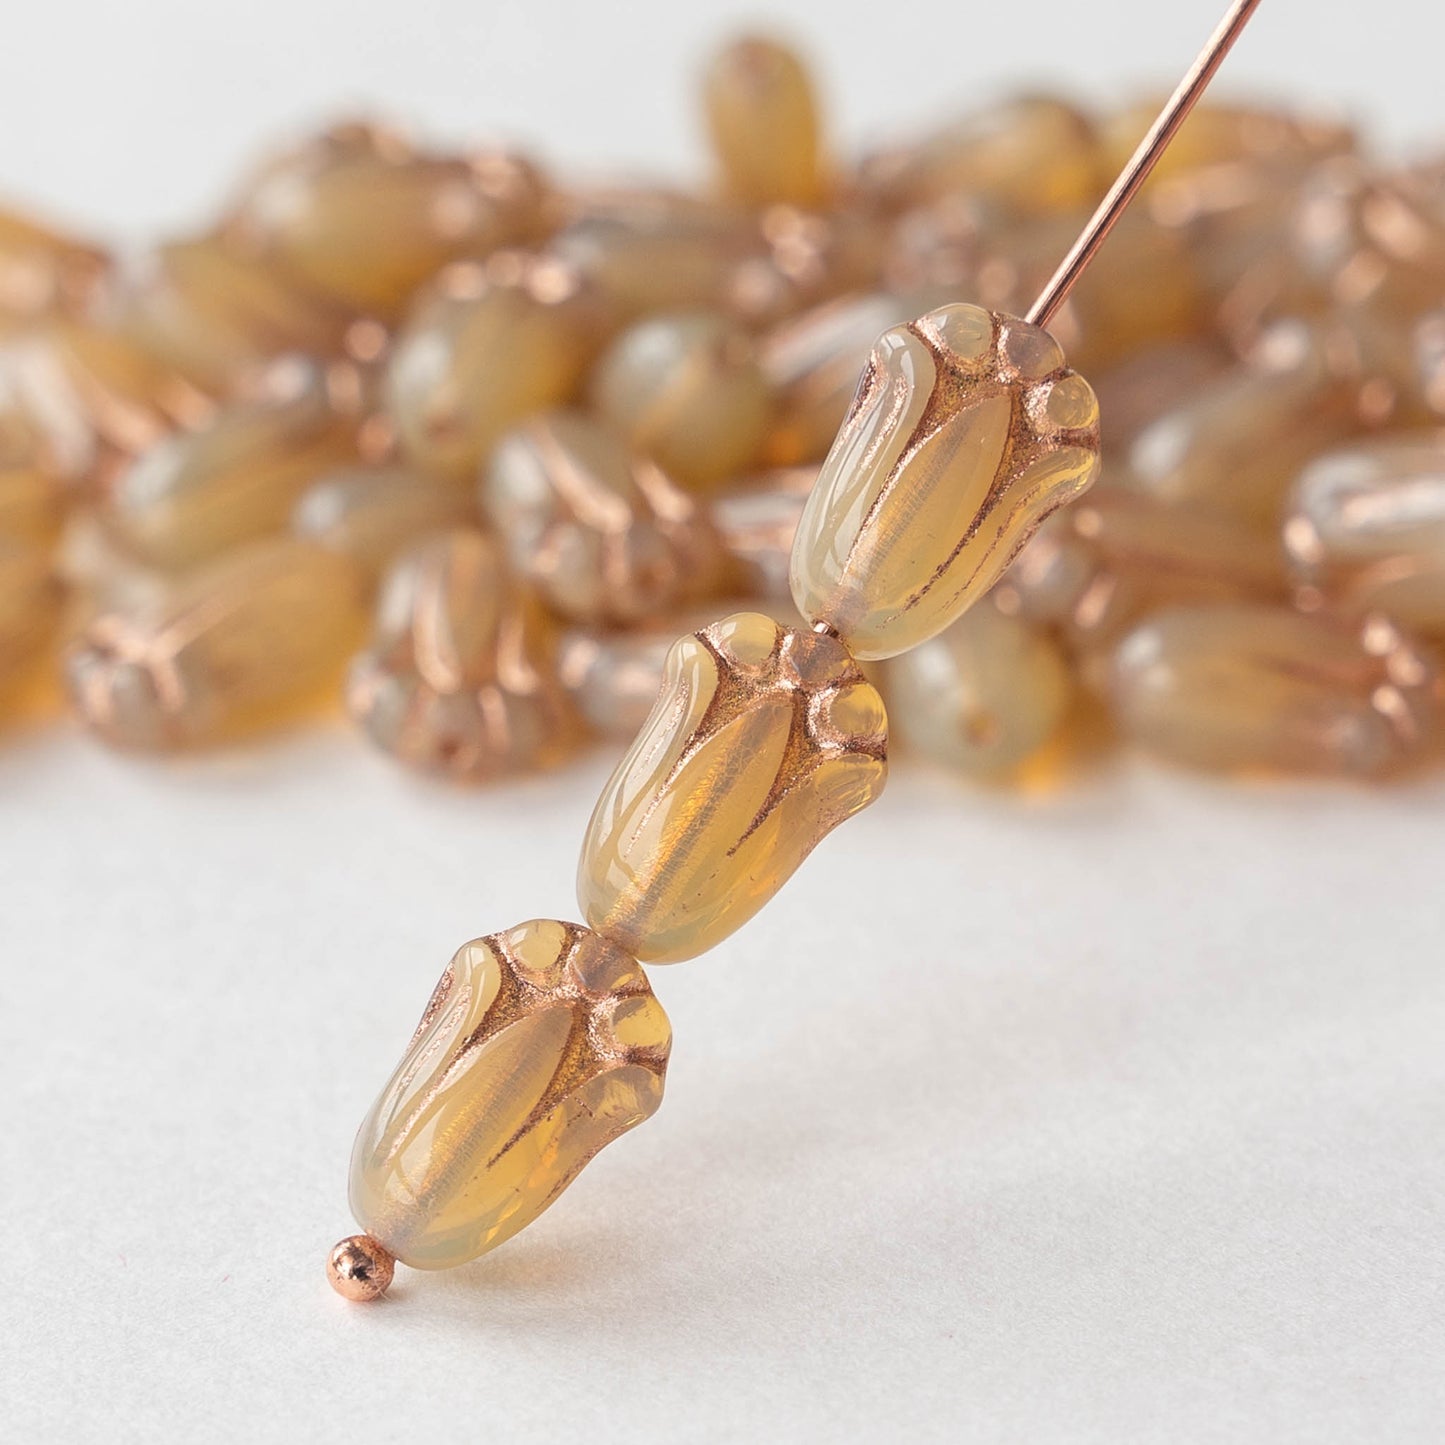 12mm Glass Tulip Beads - Beige with Copper Wash - 10 Beads